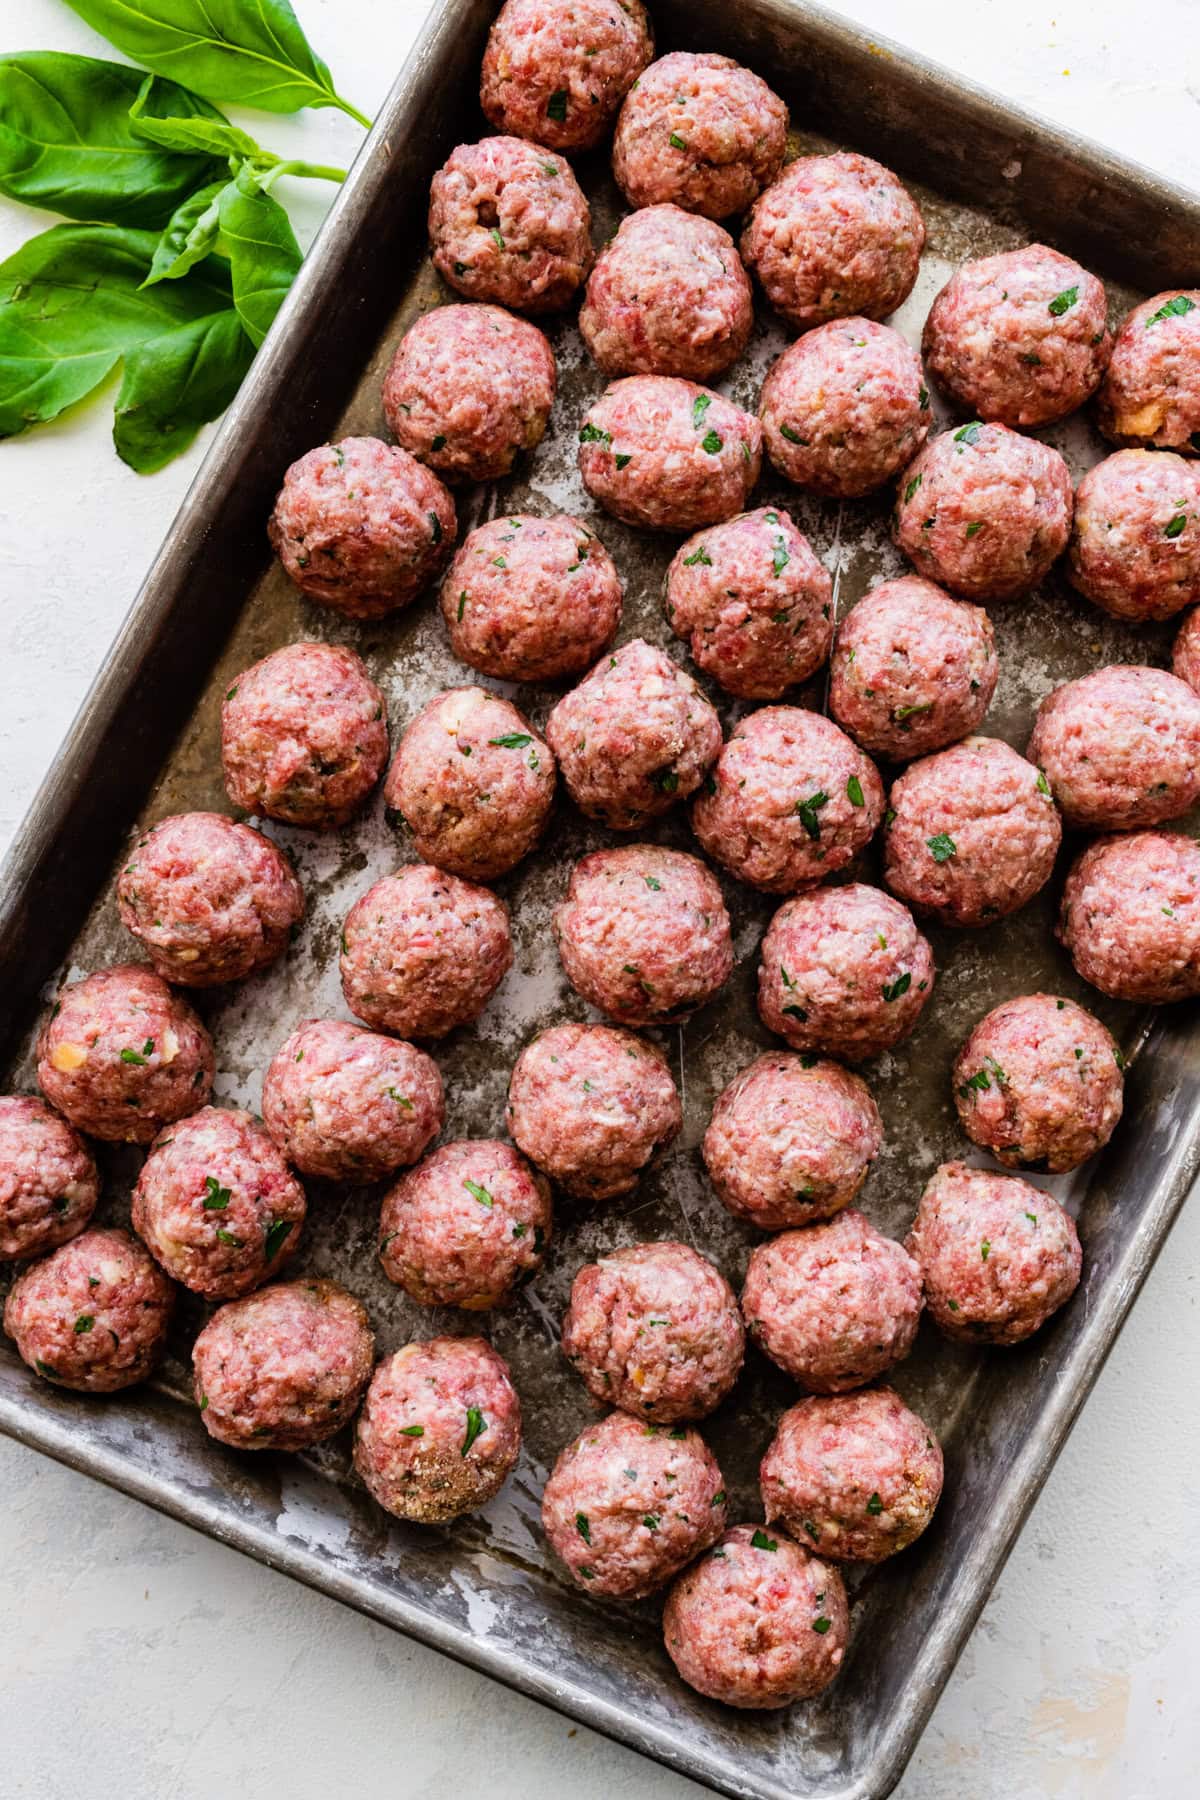 How to make Polpette (Traditional Italian Meatballs) Instructions: all meatballs ready to cook.